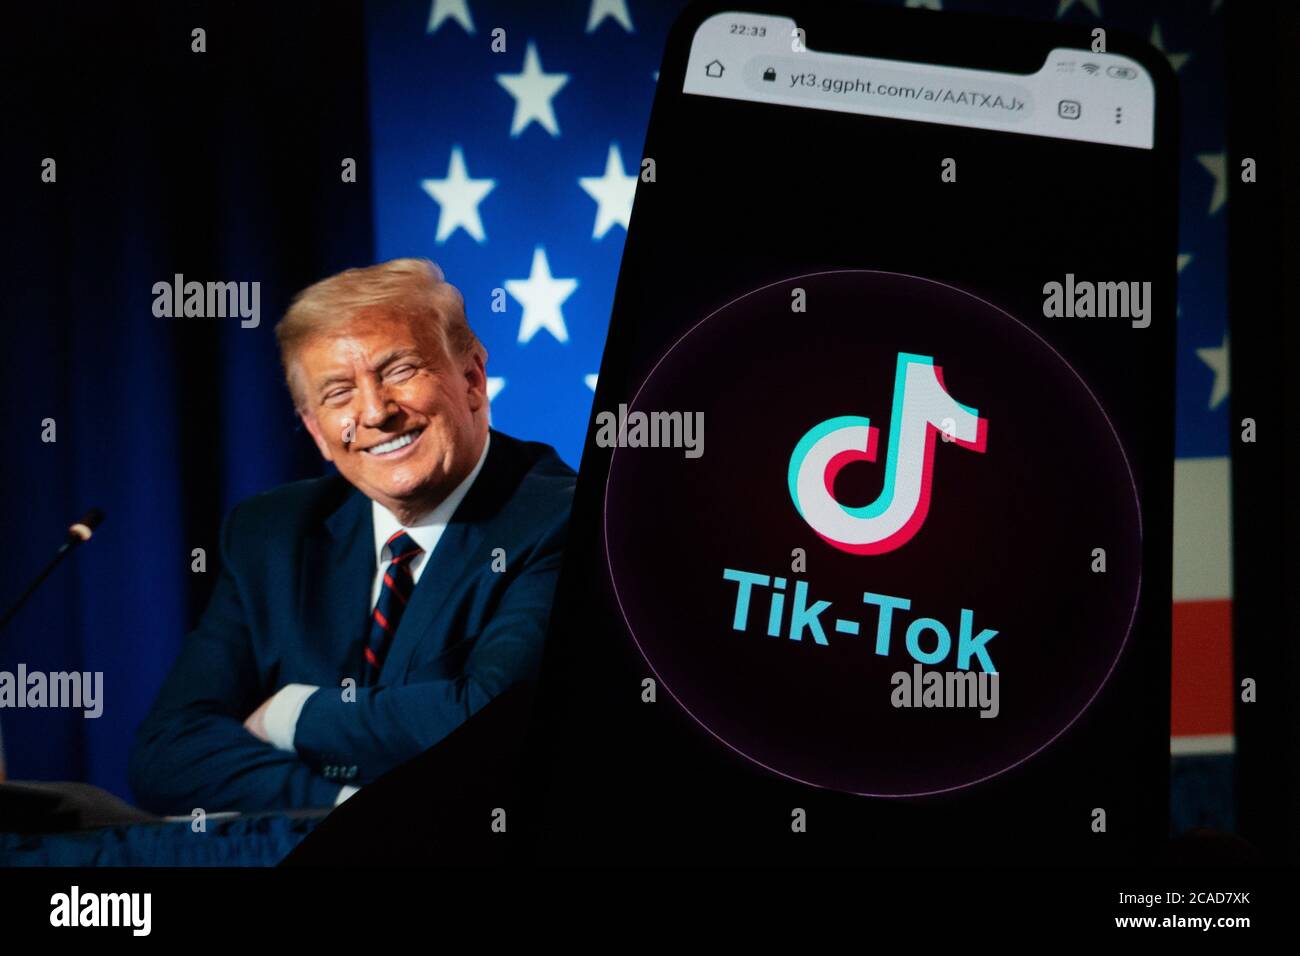 TikTok app on a phone screen and Donald Trump. TikTok is a Chinese video-sharing social networking service owned by ByteDance. Stock Photo